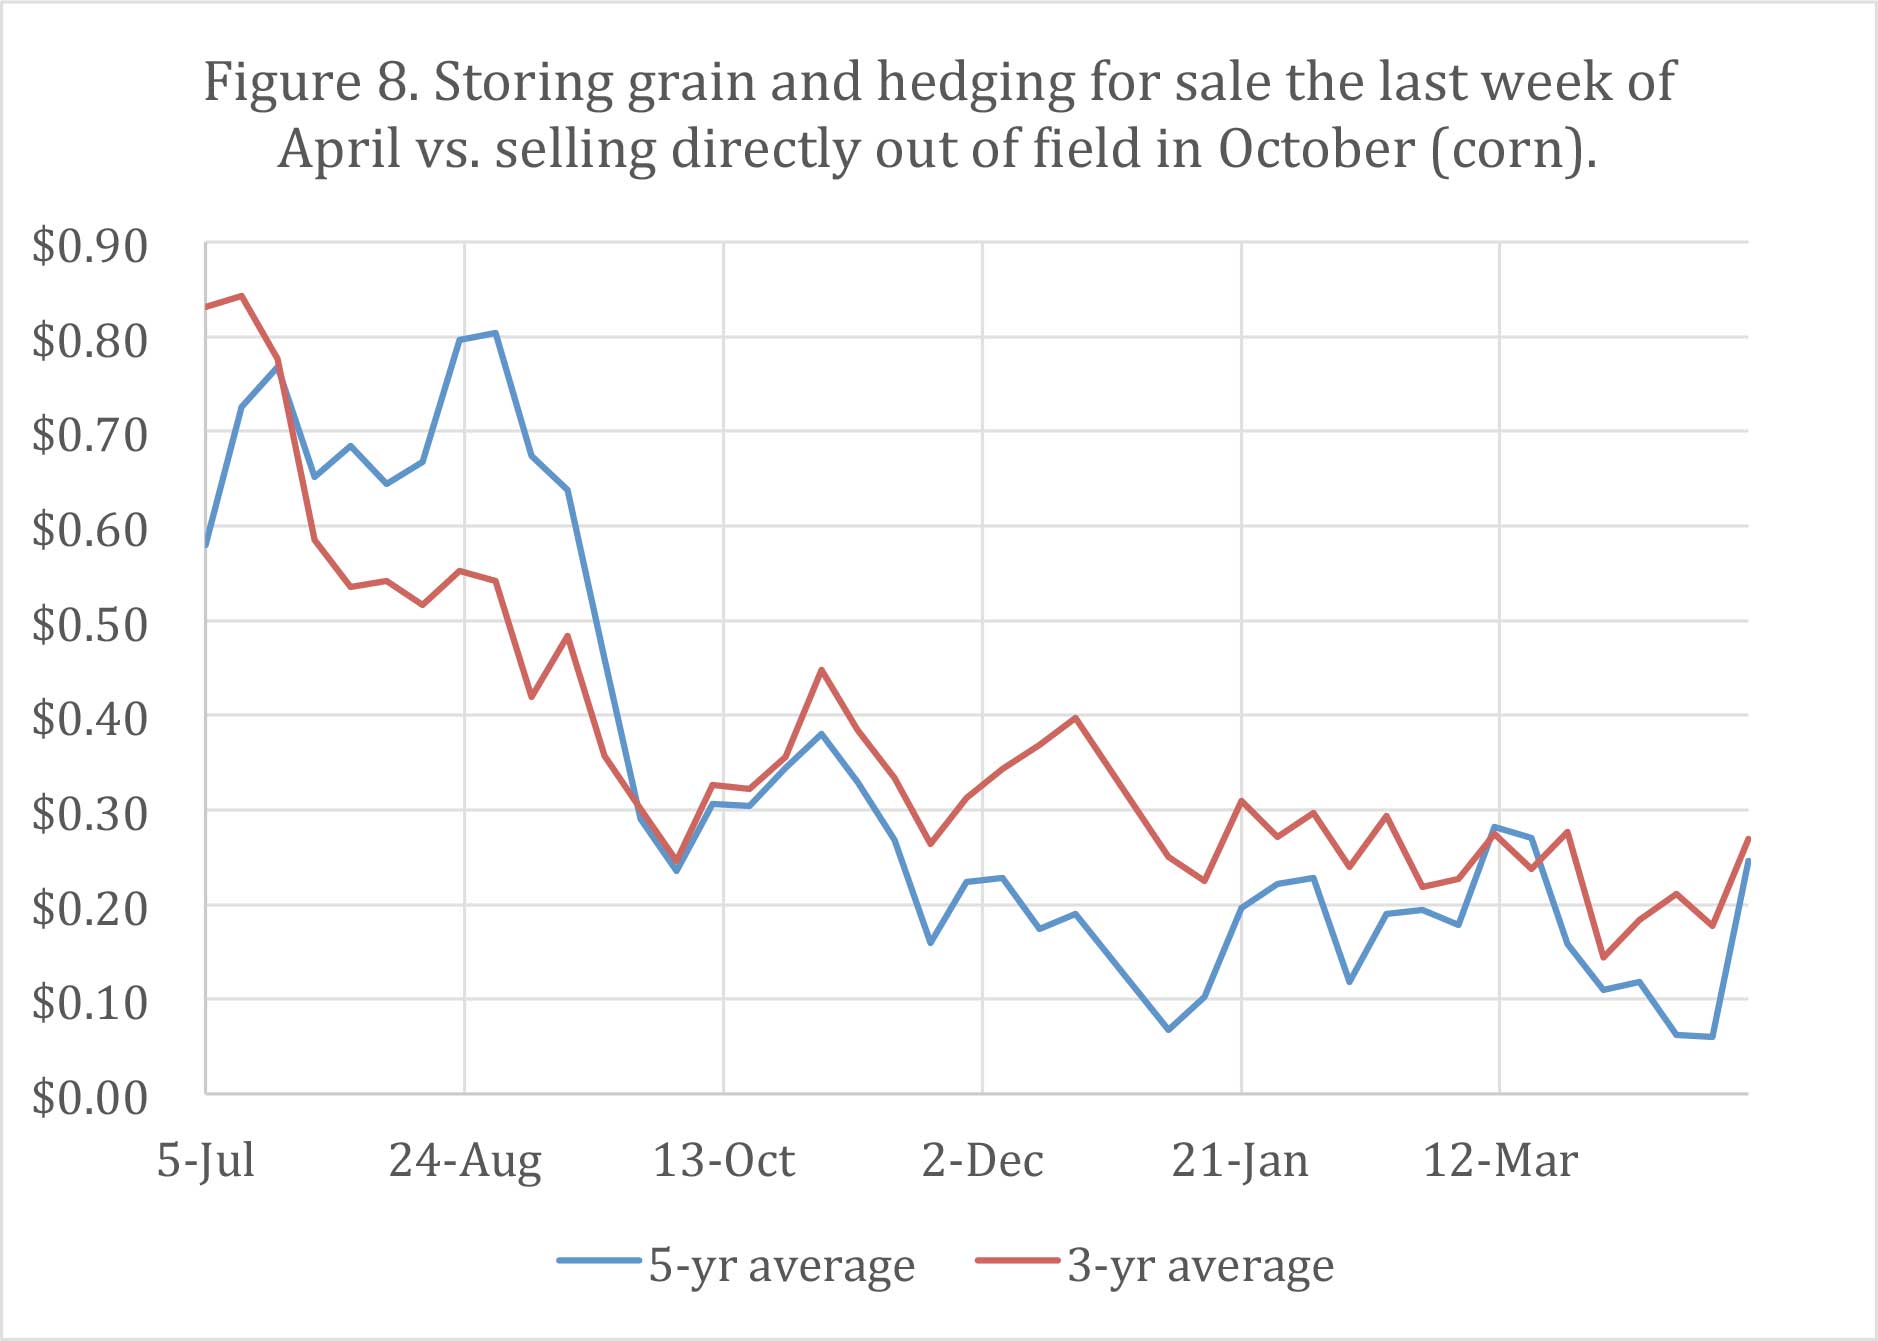 Figure 8. Storing grain and hedging for sale the last week of April vs. selling directly out of field in October (corn).